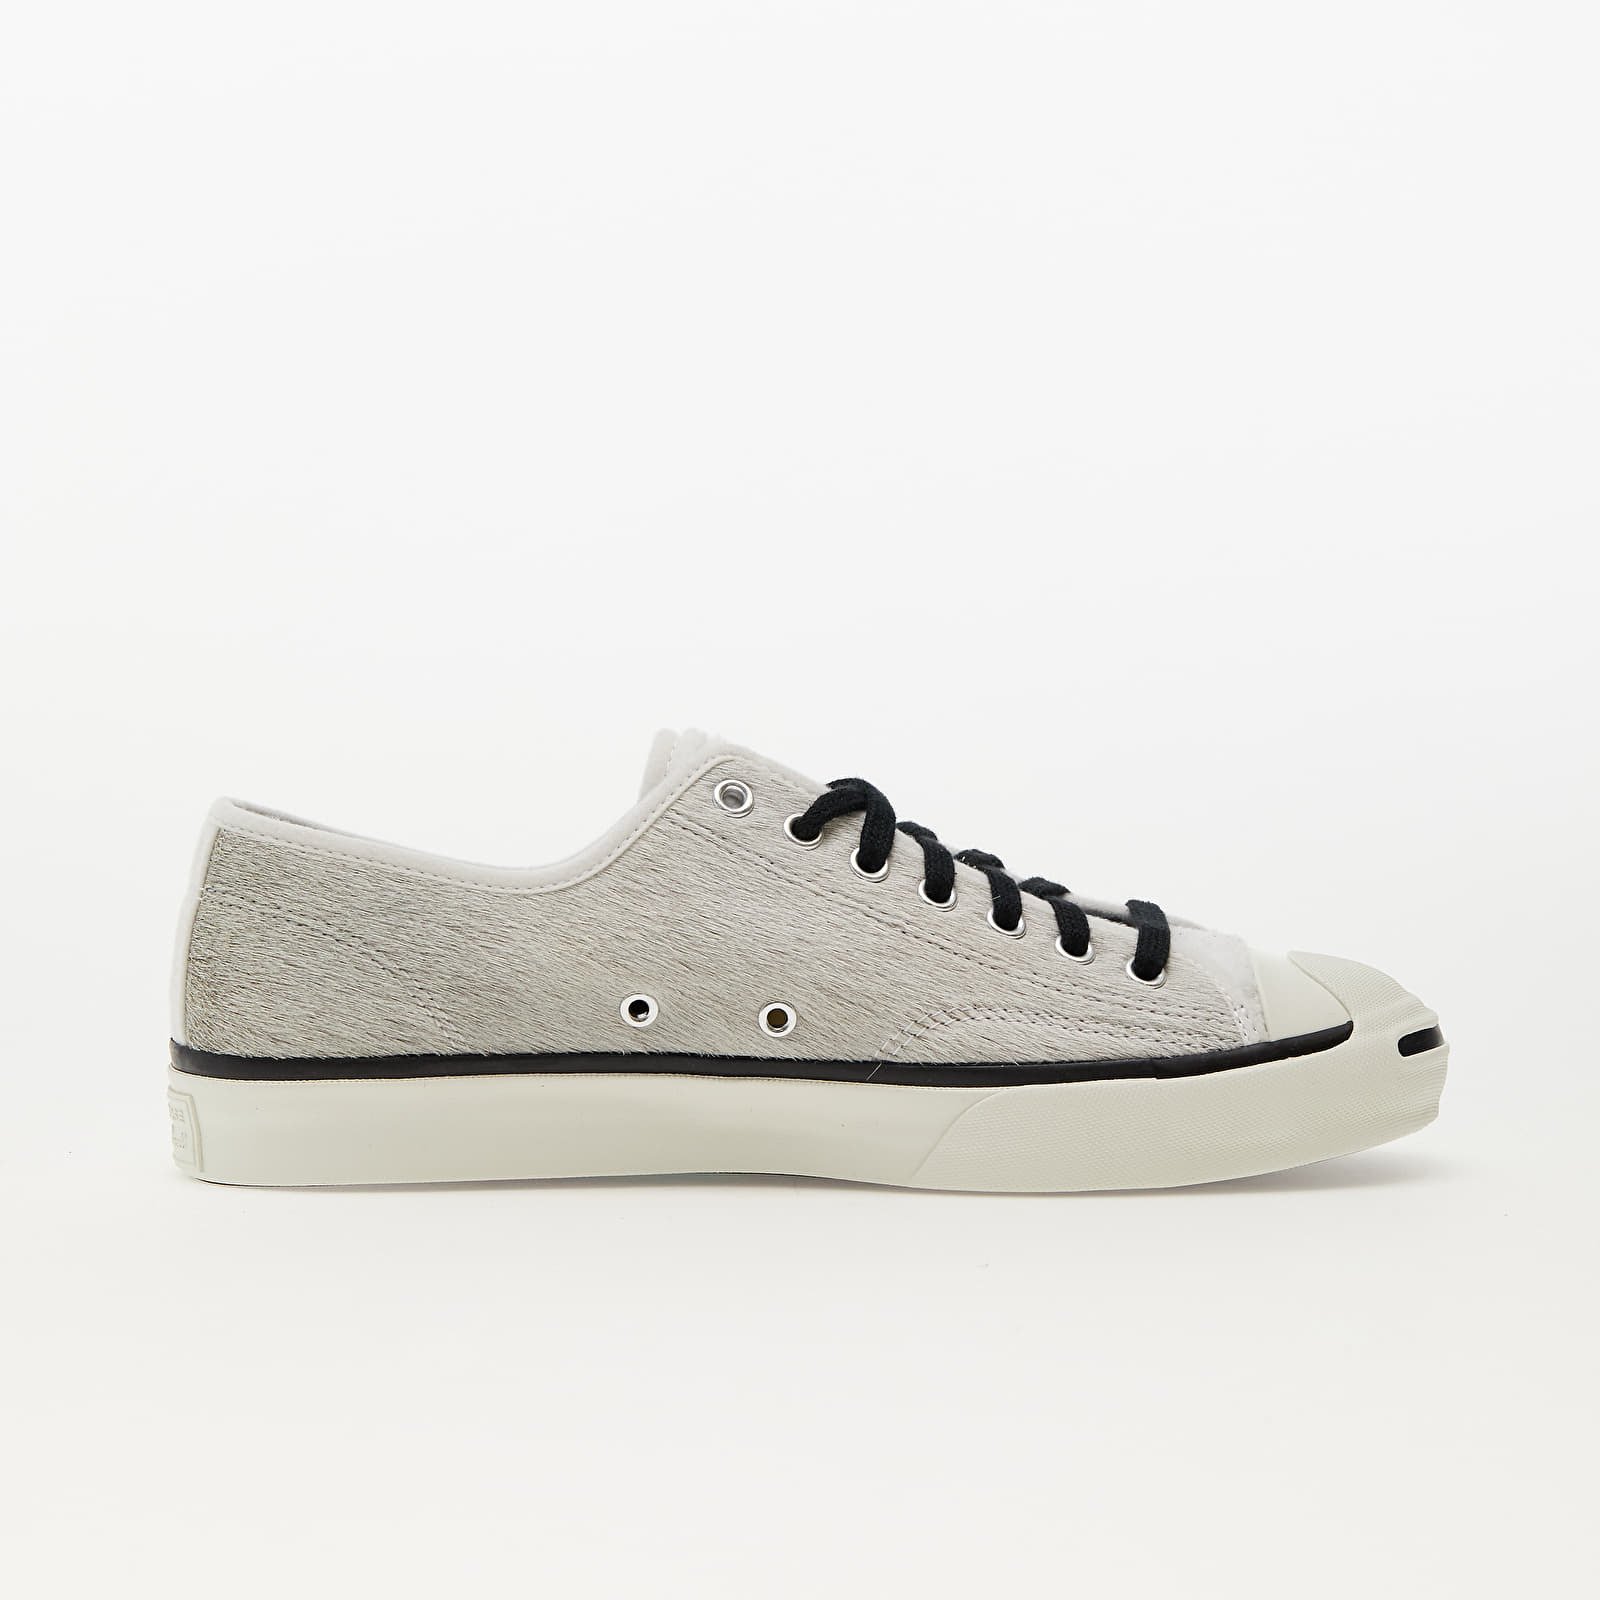 CLOT x Jack Purcell Low